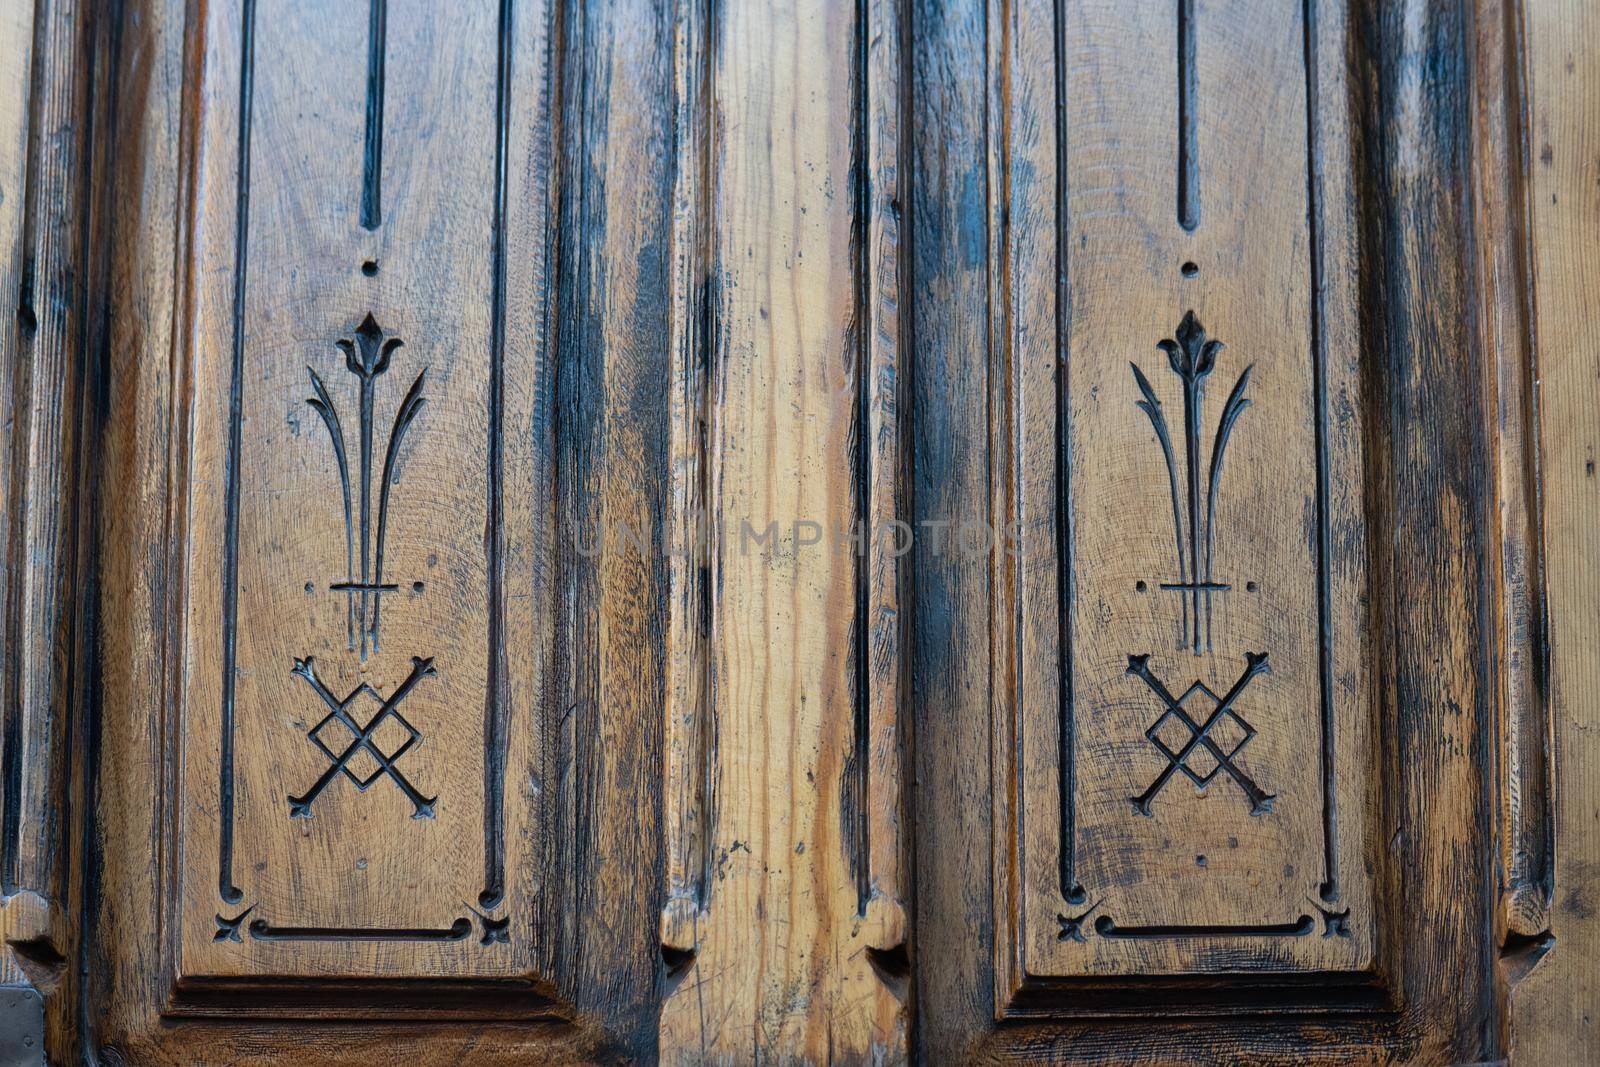 Antique wooden door with inscriptions seen by madrid by xavier_photo